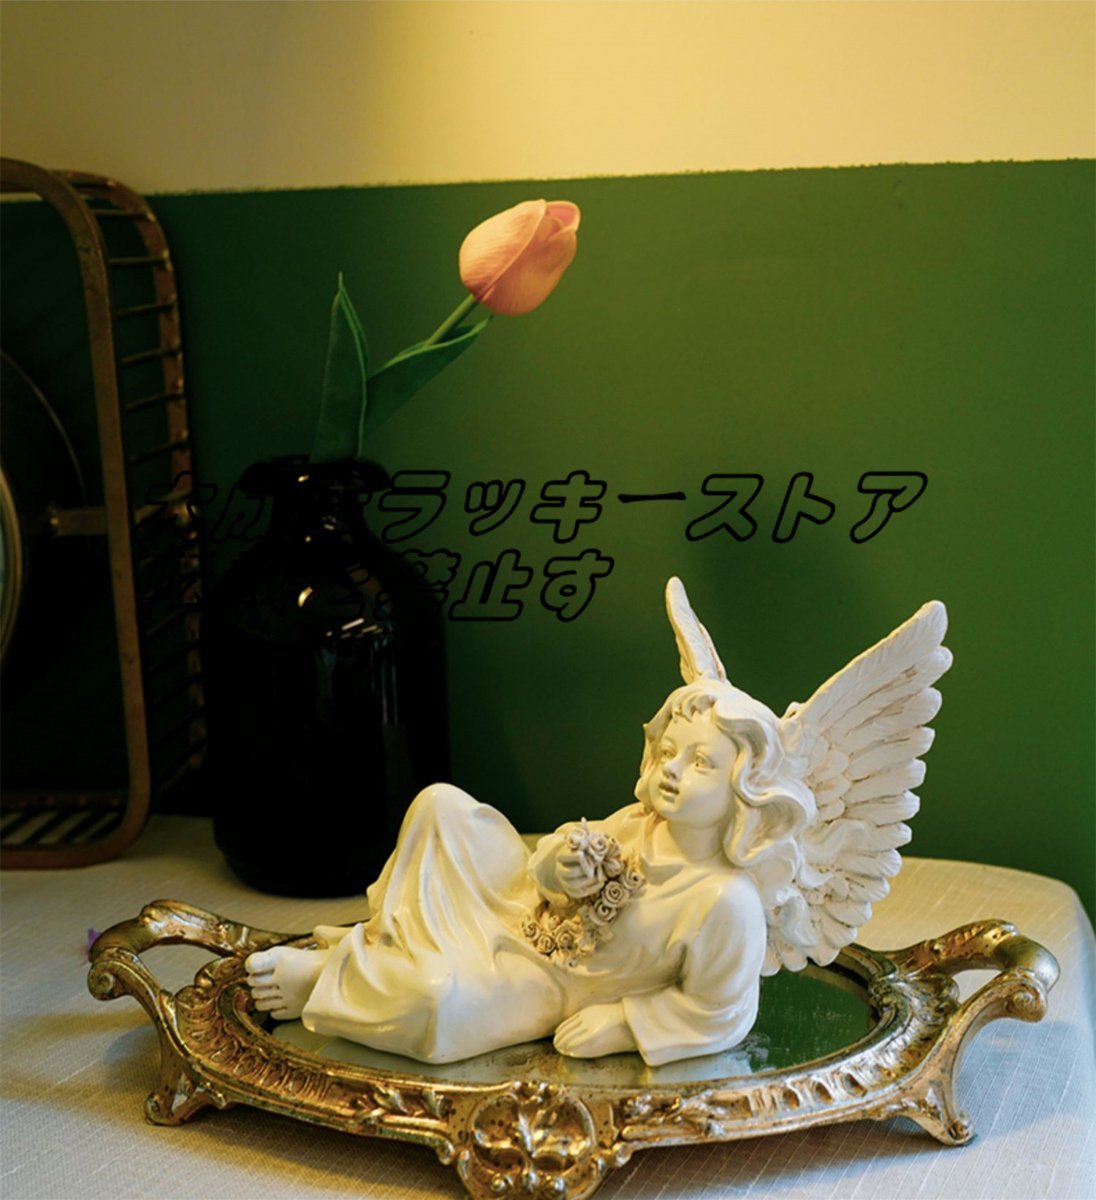 Angel holding a flower, angel, fairy, sculpture, statue, Western, miscellaneous goods, object, ornament, figurine, entrance, room, office, resin, handmade z2043, Interior accessories, ornament, Western style